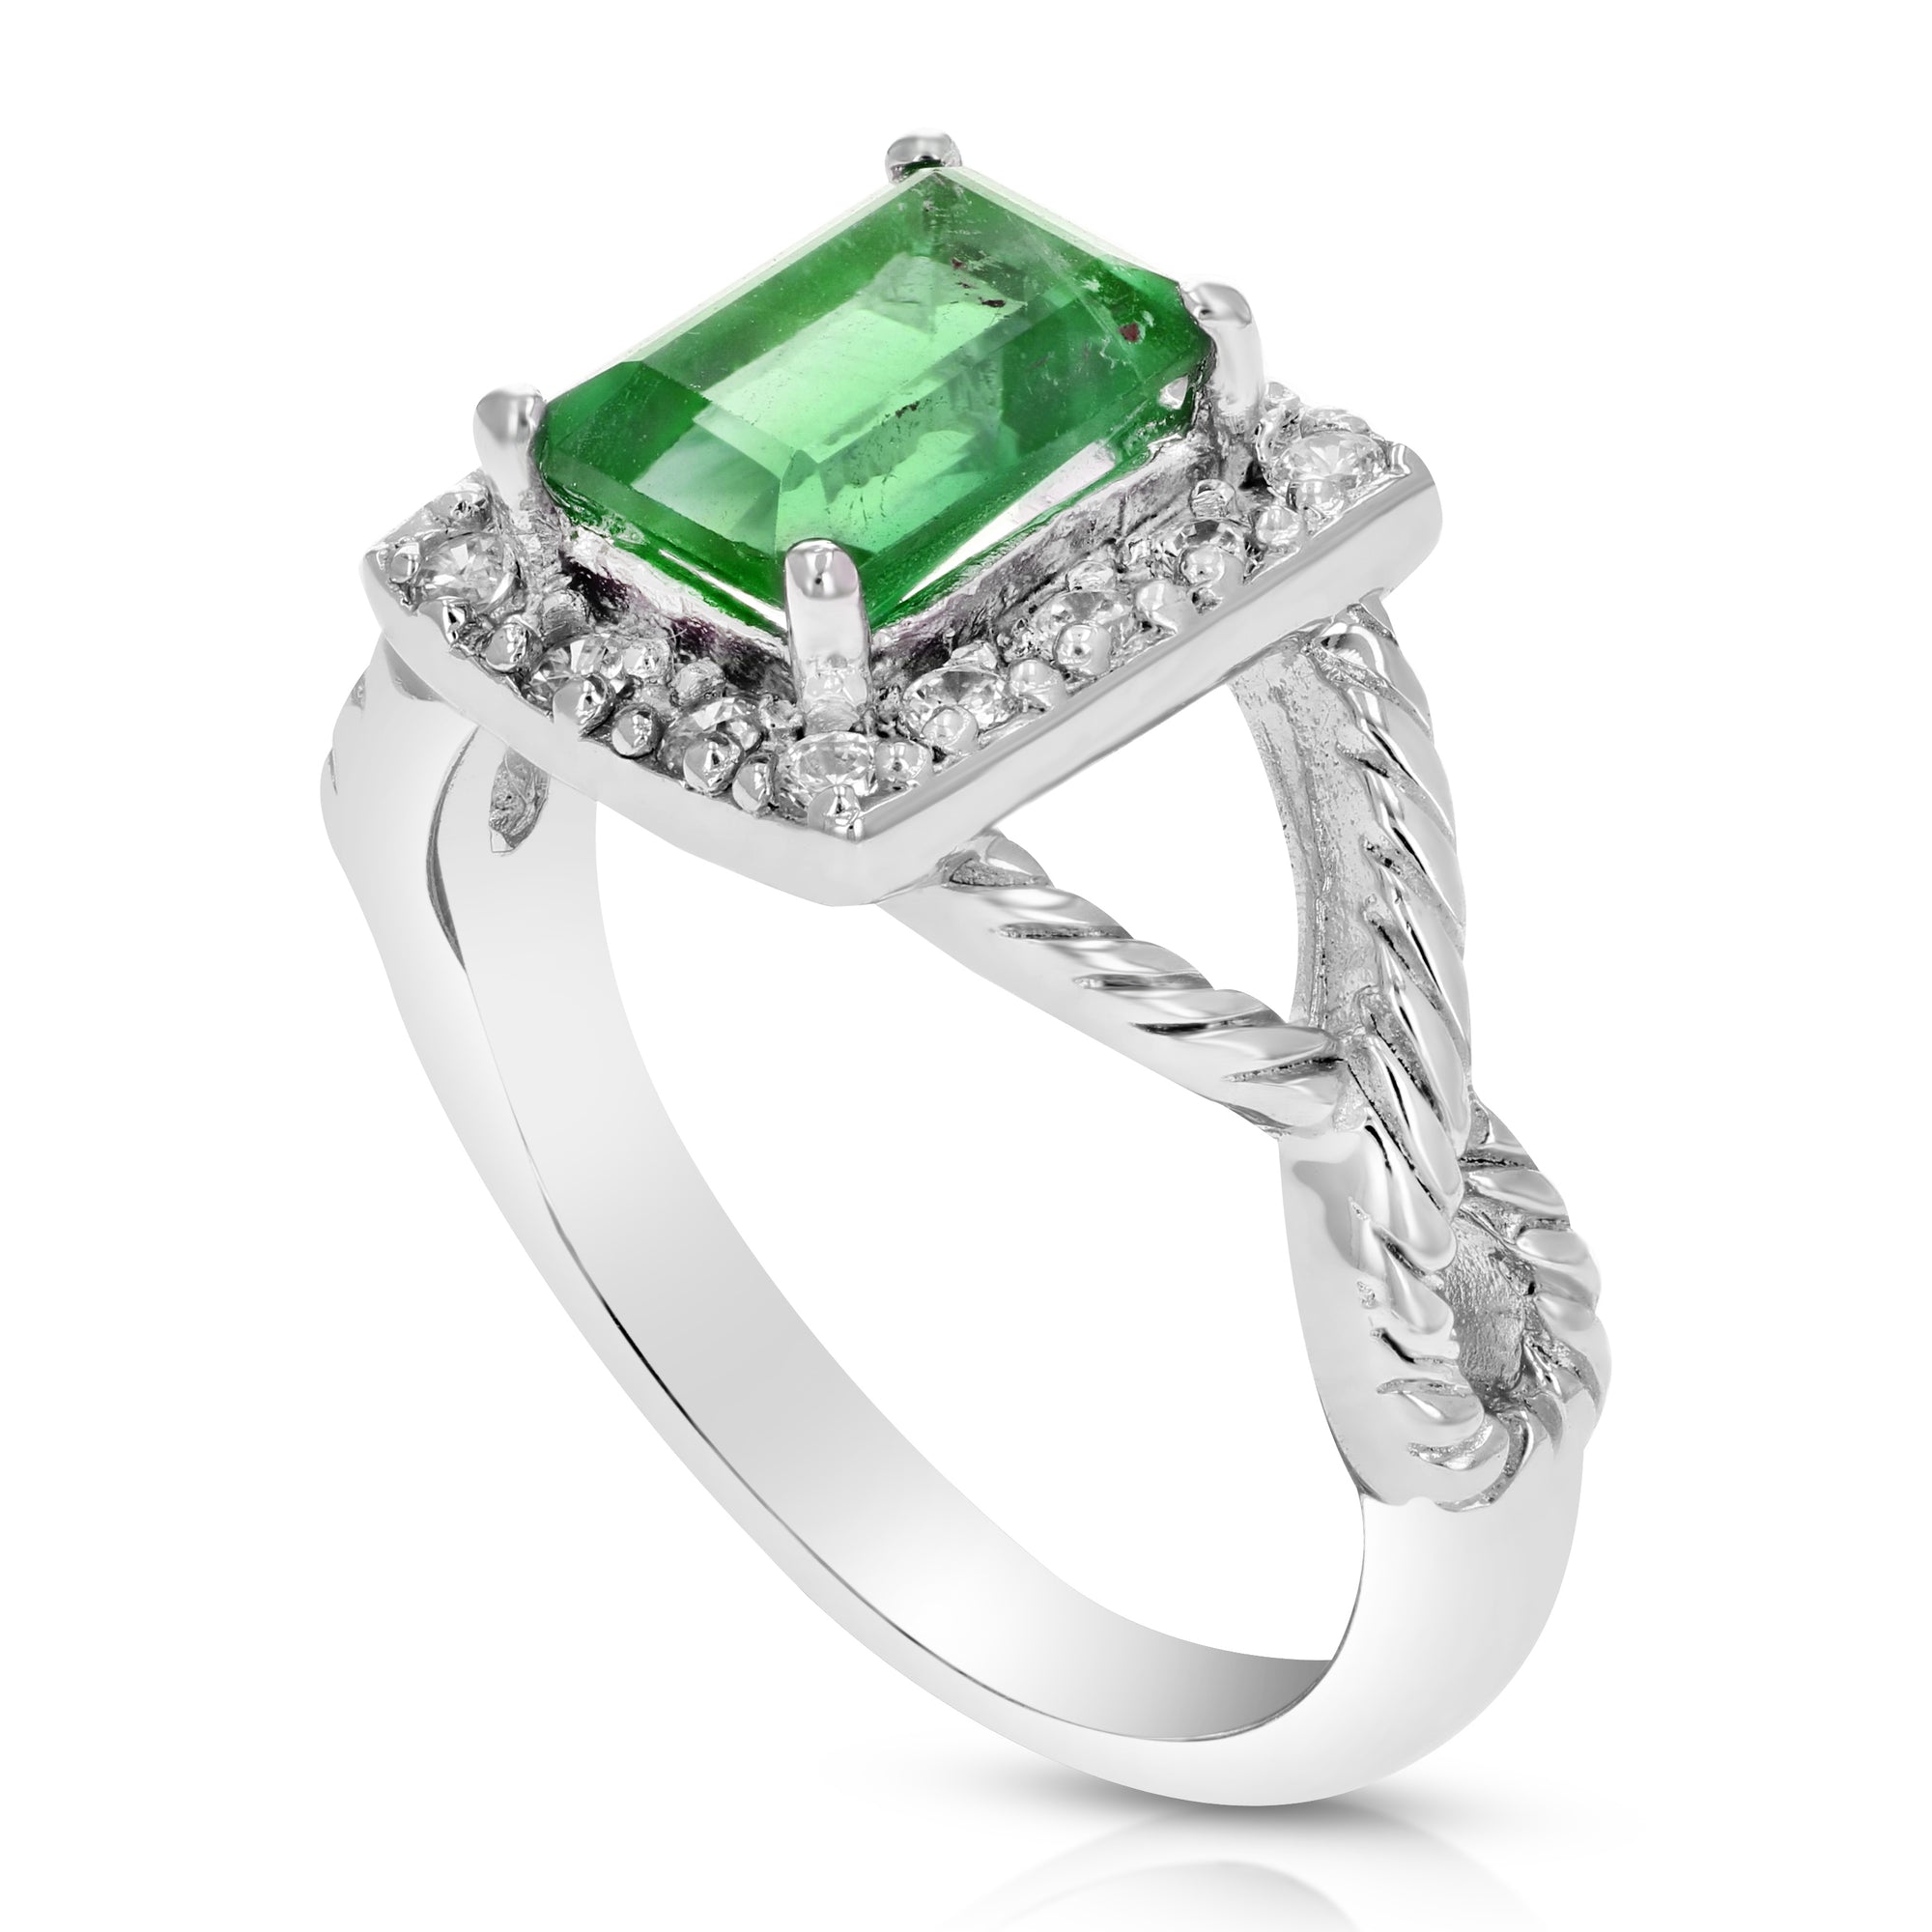 0.90 cttw Green Topaz Ring .925 Sterling Silver with Rhodium Emerald Cut 7x5 MM